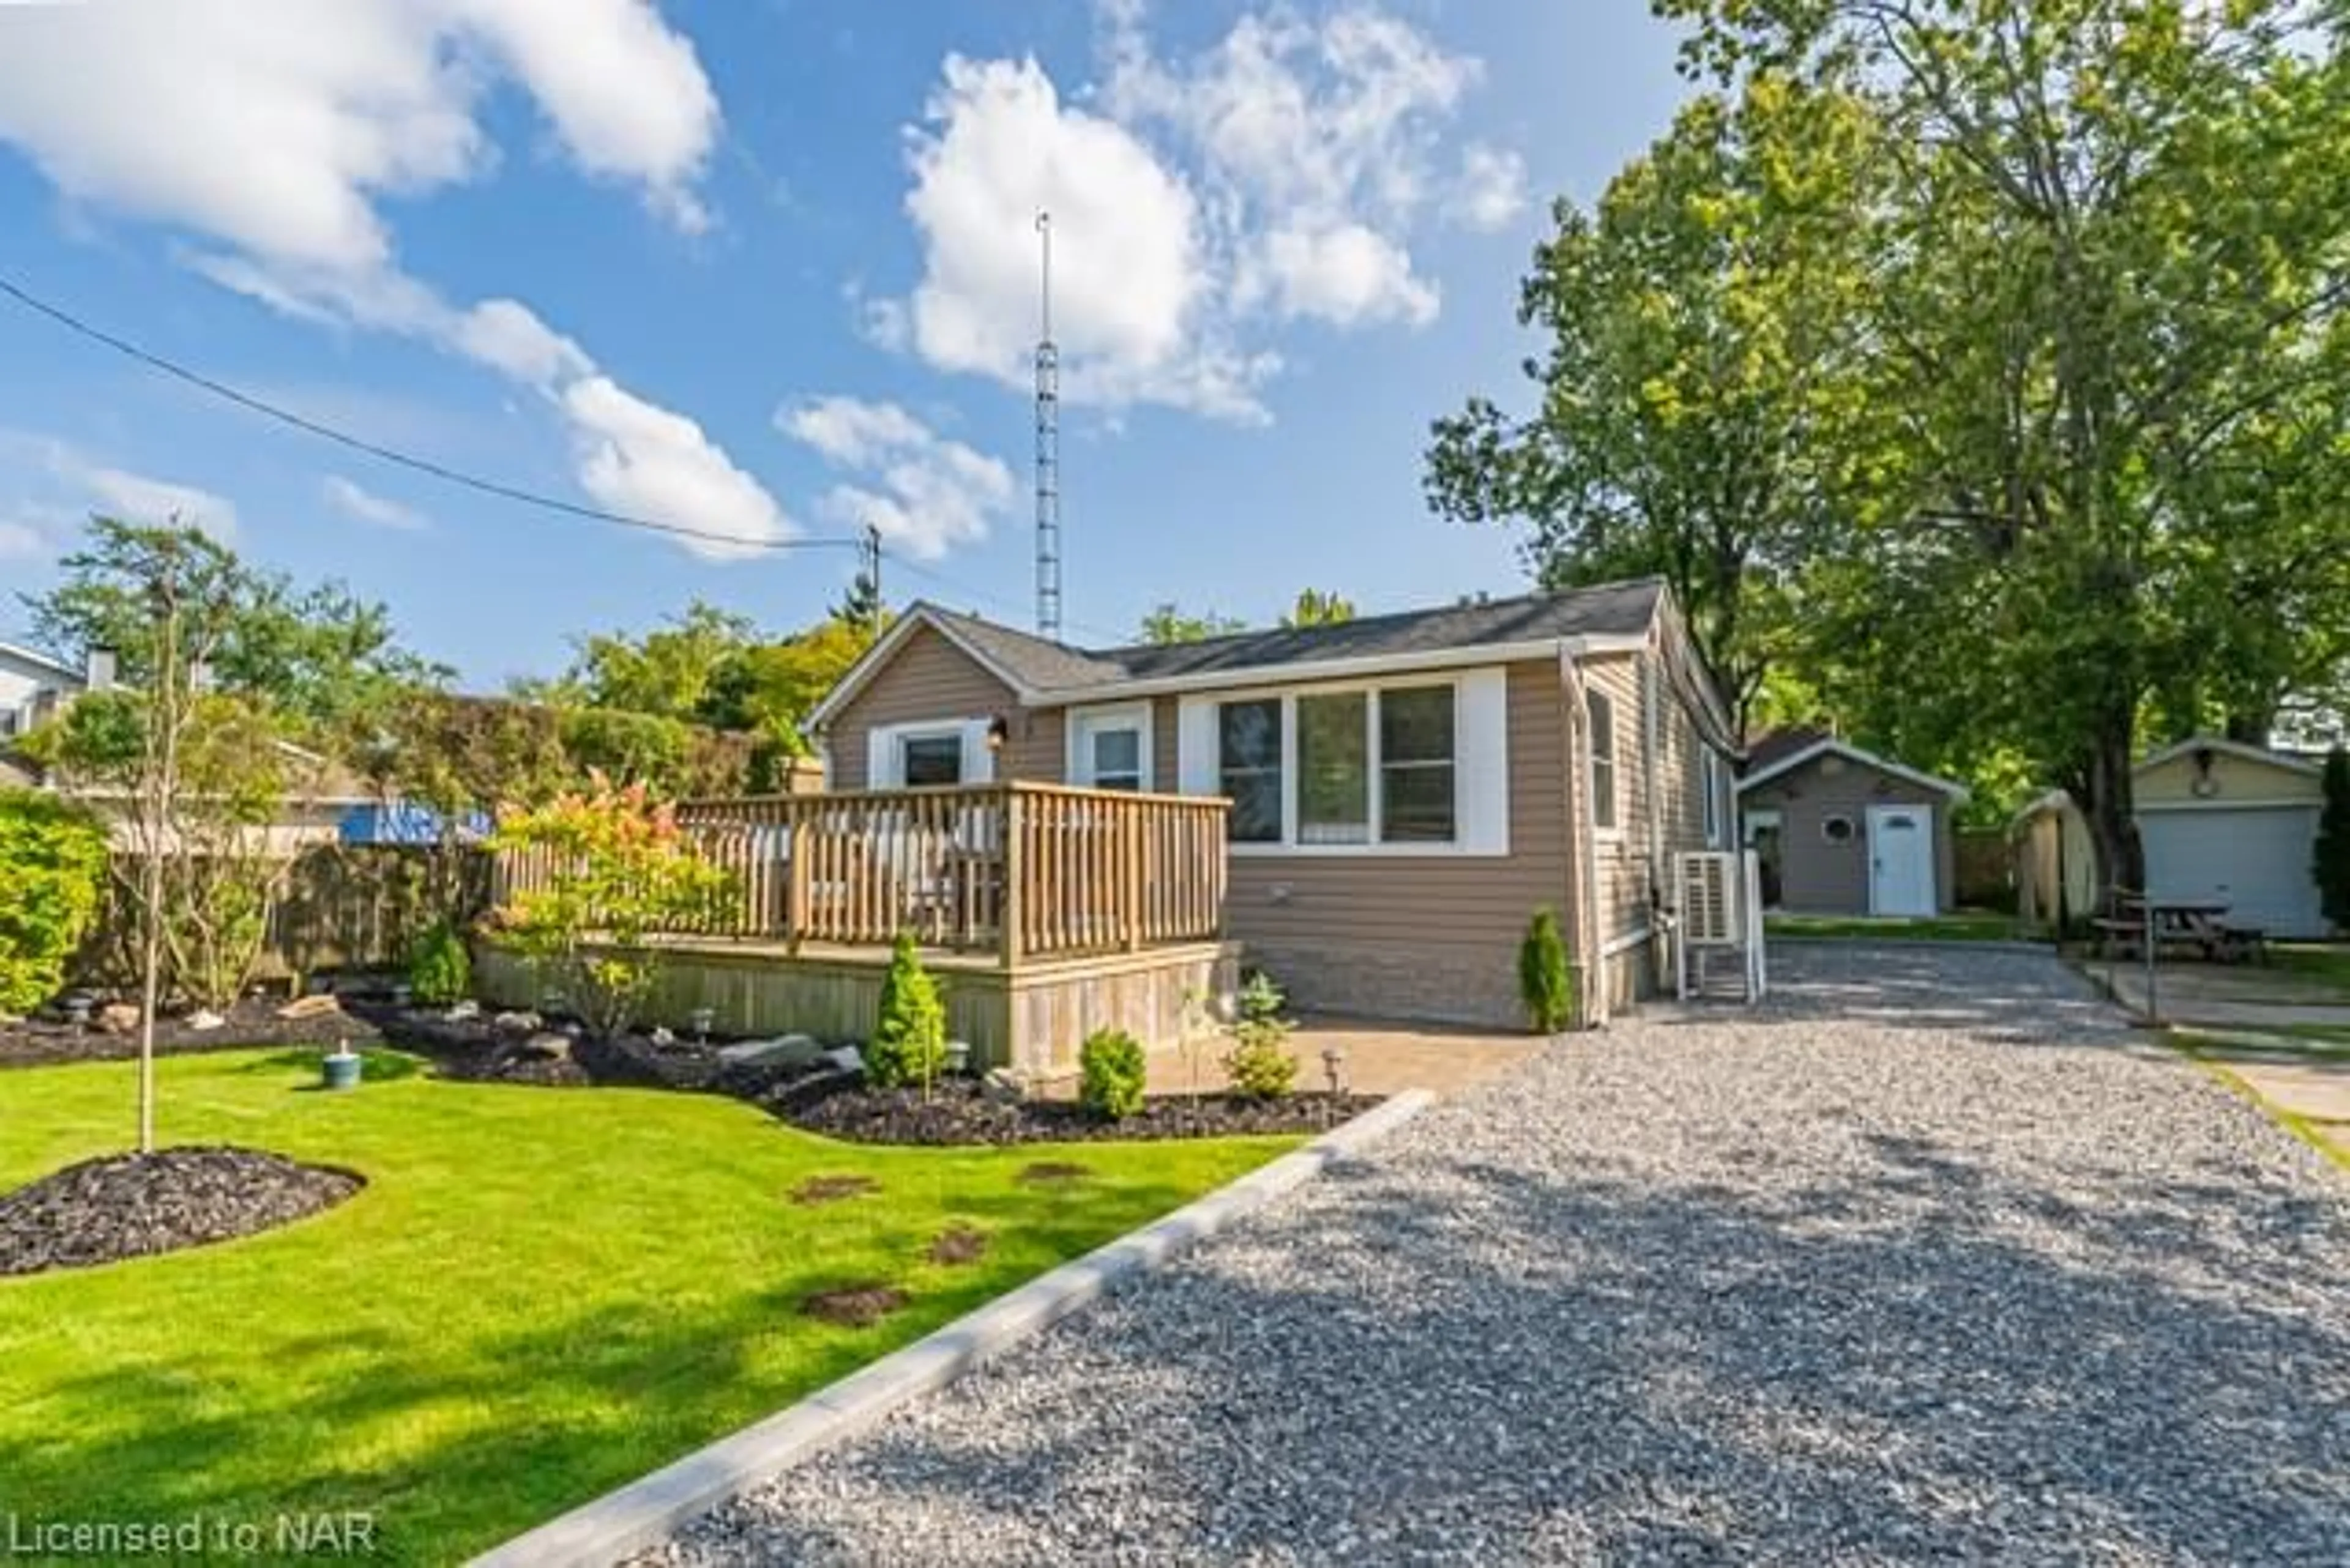 Cottage for 12187 Lakeshore Rd, Wainfleet Ontario L0S 1V0